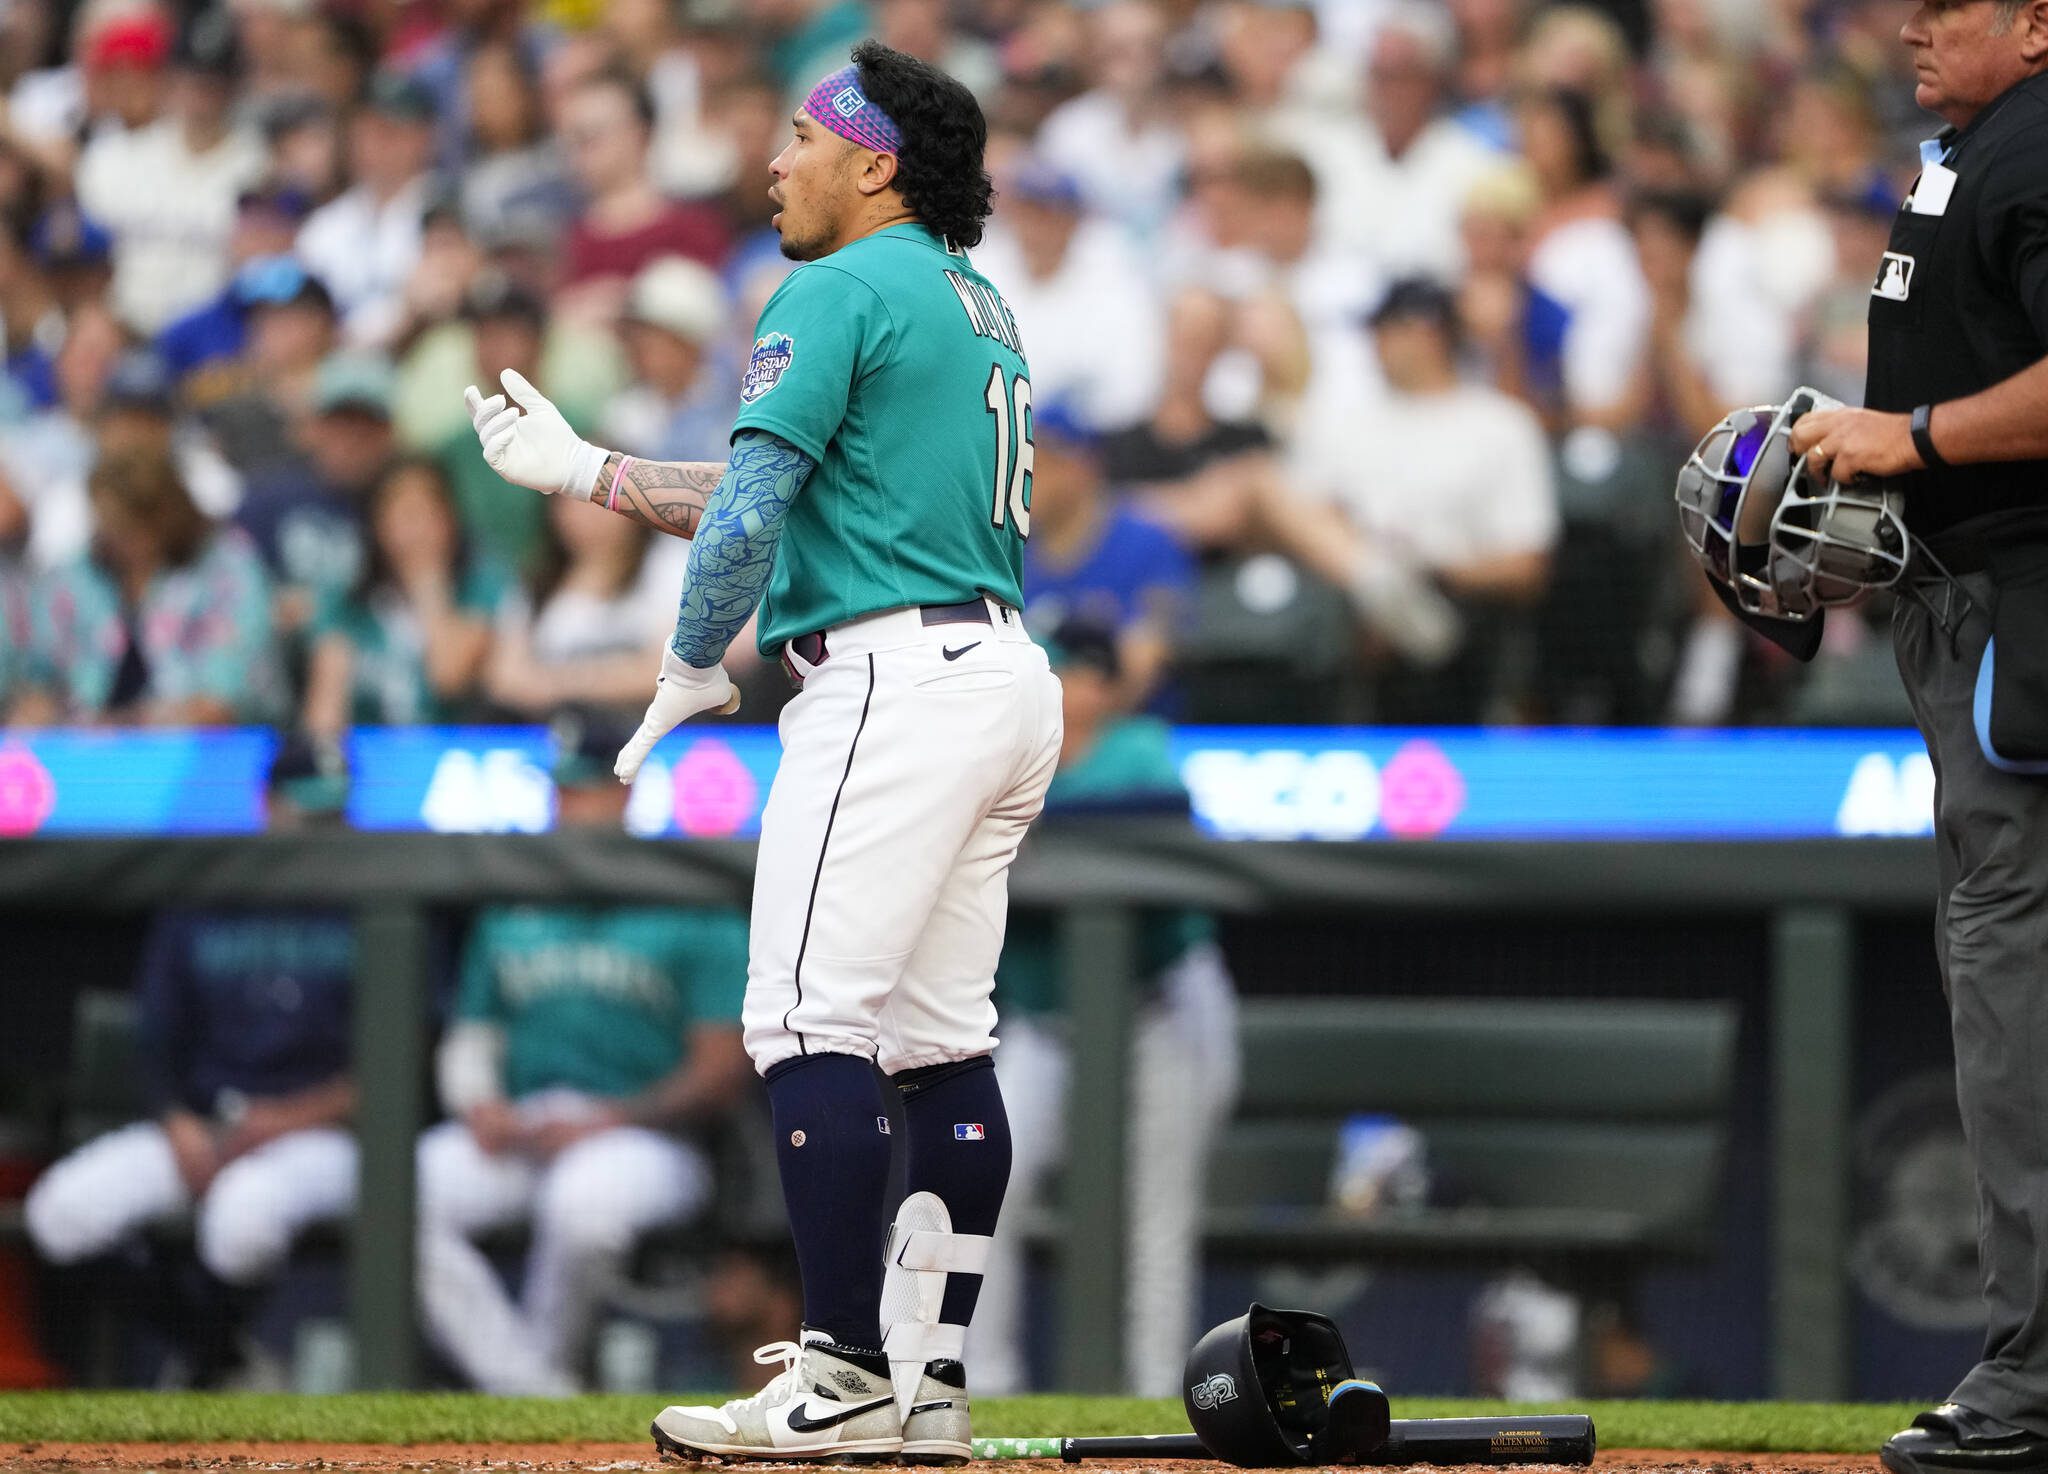 The Mariners’ Kolten Wong removes his batting gear after striking out swinging against the Tigers to end the third inning of a game on July 15 in Seattle. (AP Photo/Lindsey Wasson)